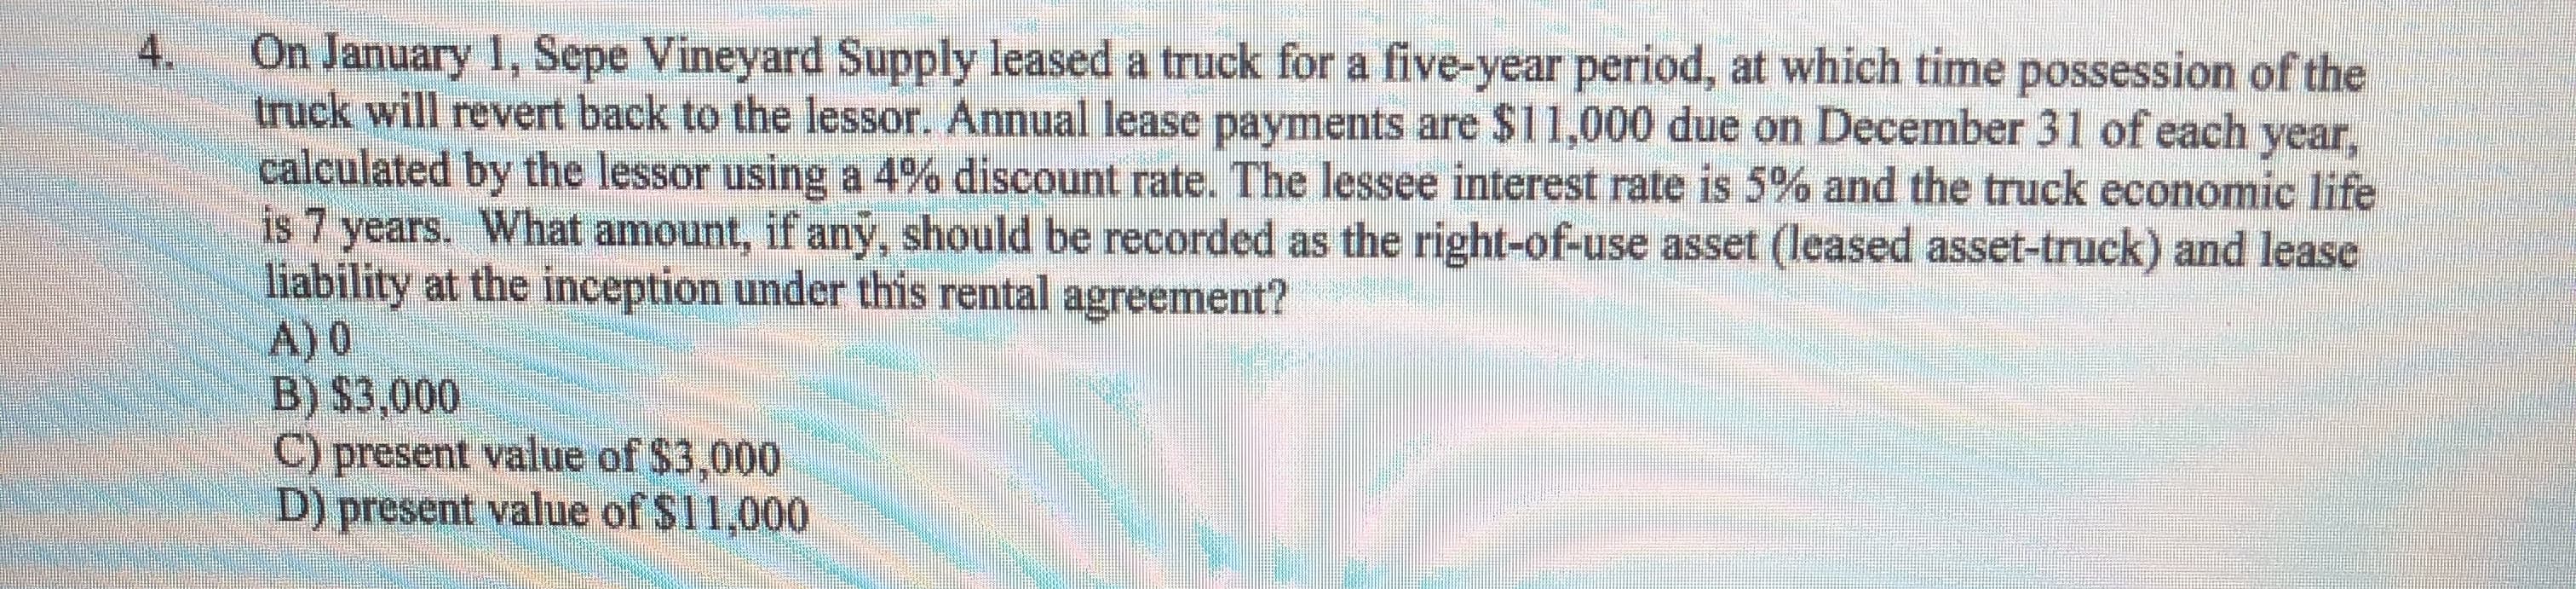 4.
On January 1, Sepe Vineyard Supply leased a truck for a five-year period, at which time possession of the
truck will revert back to the lessor. Annual lease payments are $11,000 due on December 31 of each year,
calculated by the lessor using a 4% discount rate. The lessee interest rate is 5% and the truck economic life
is 7 years. What amount, if any, should be recorded as the right-of-use asset (leased asset-truck) and lease
liability at the inception under this rental agreement?
A) 0
B) $3,000
C) present value of $3,000
D) present value of $11,000
